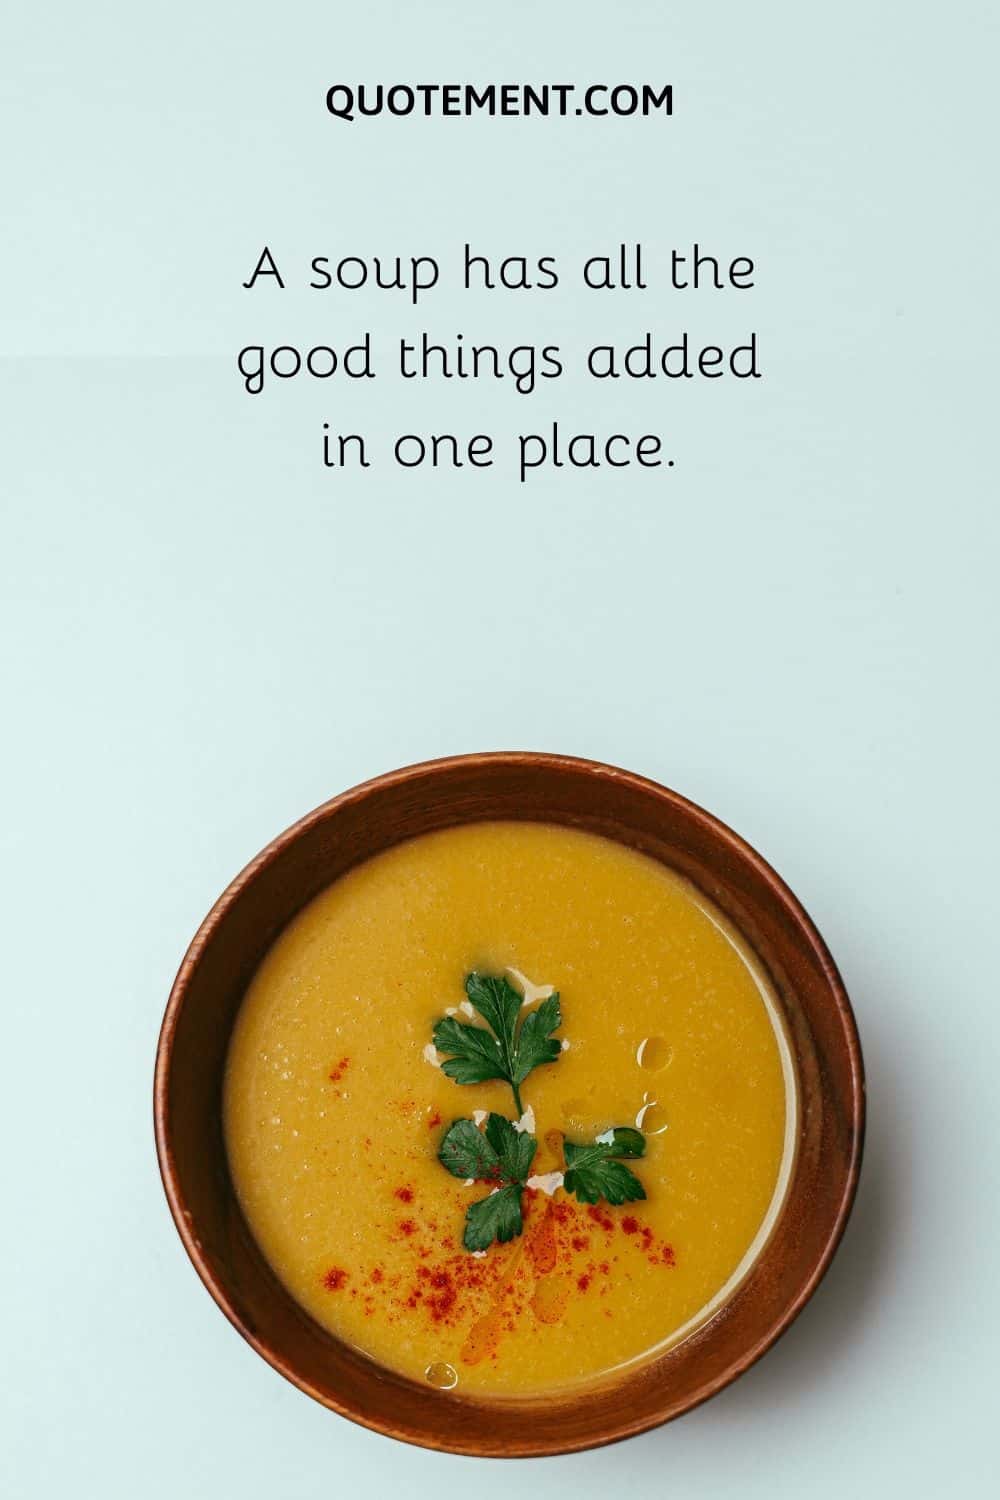 A soup has all the good things added in one place